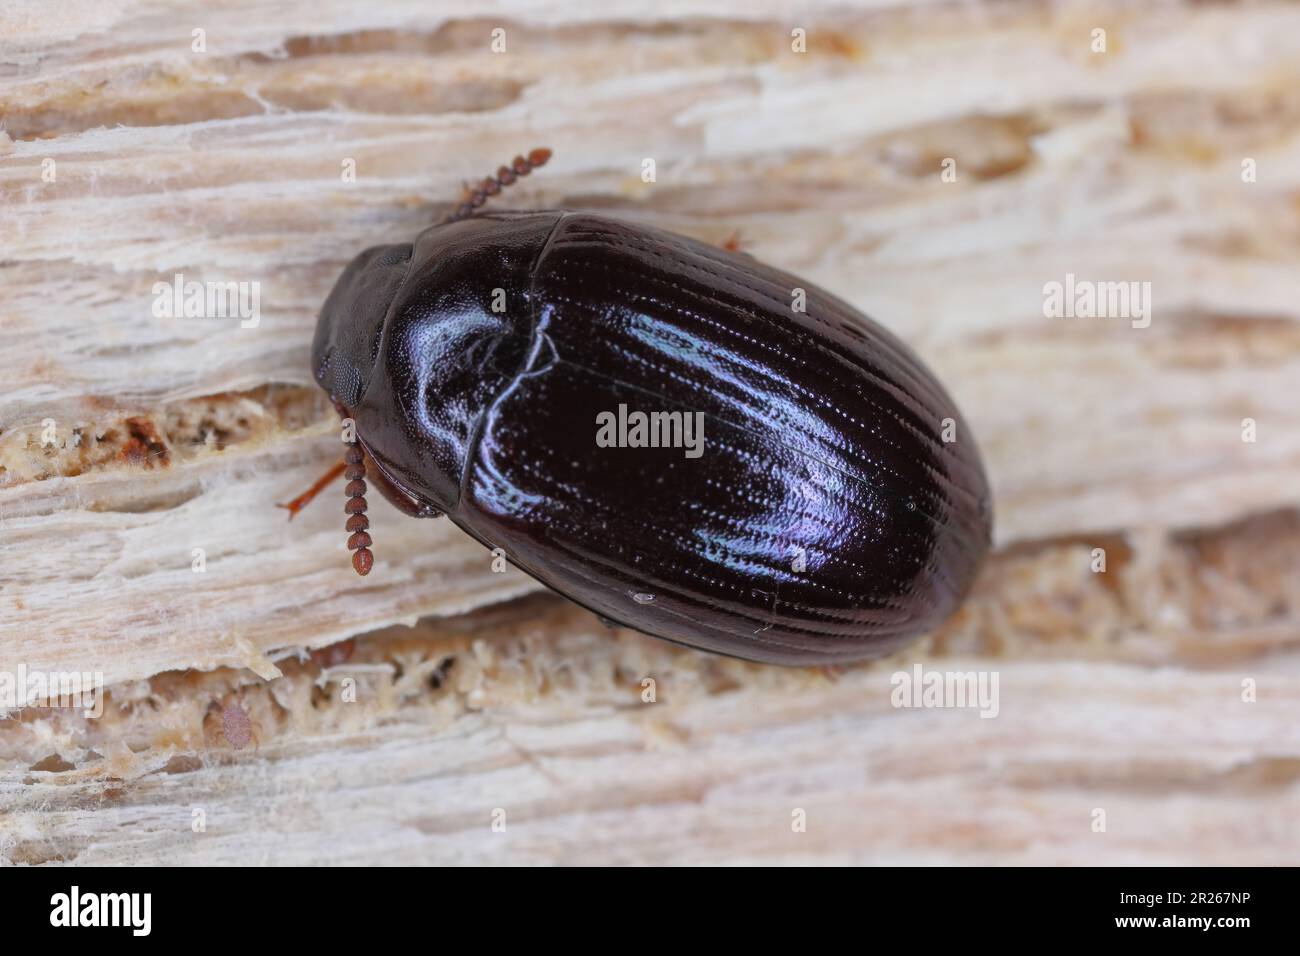 Platydema violaceum, darkling beetle (Tenebionidae). An insect found under the bark of a dead tree. Stock Photo